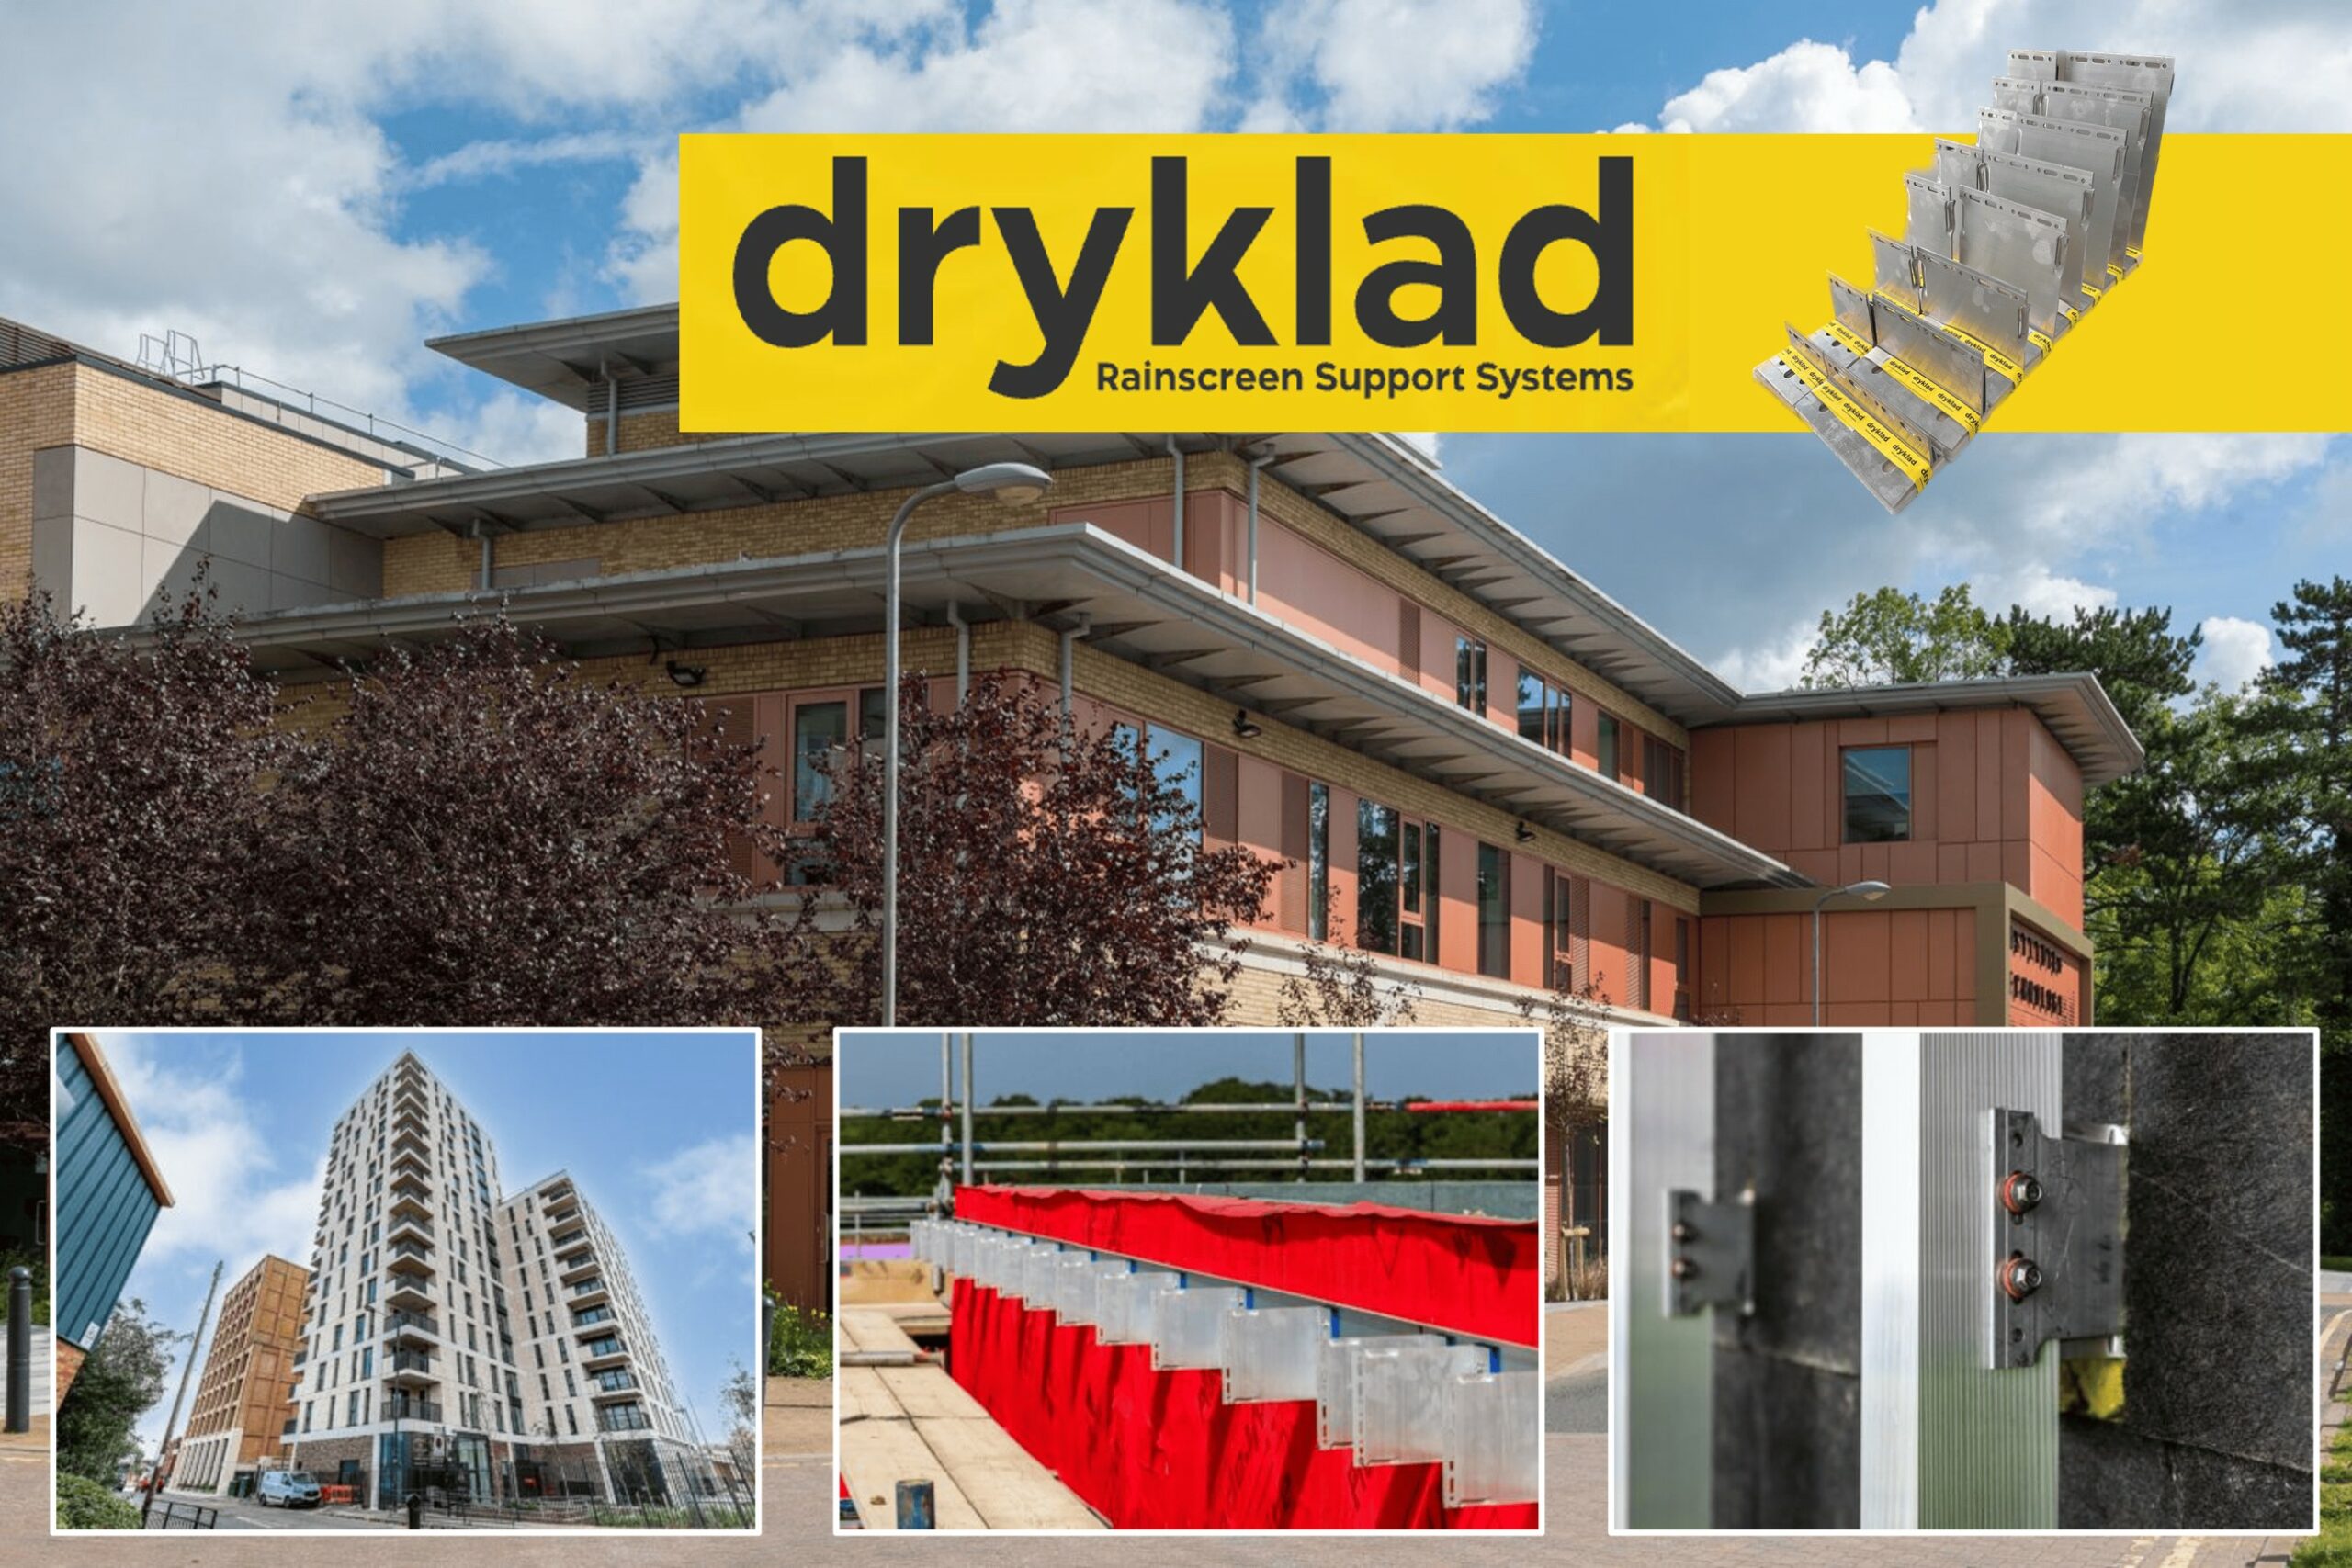 Dryklad: Revolutionising the UK Construction Industry with Innovative Rainscreen Cladding Support System